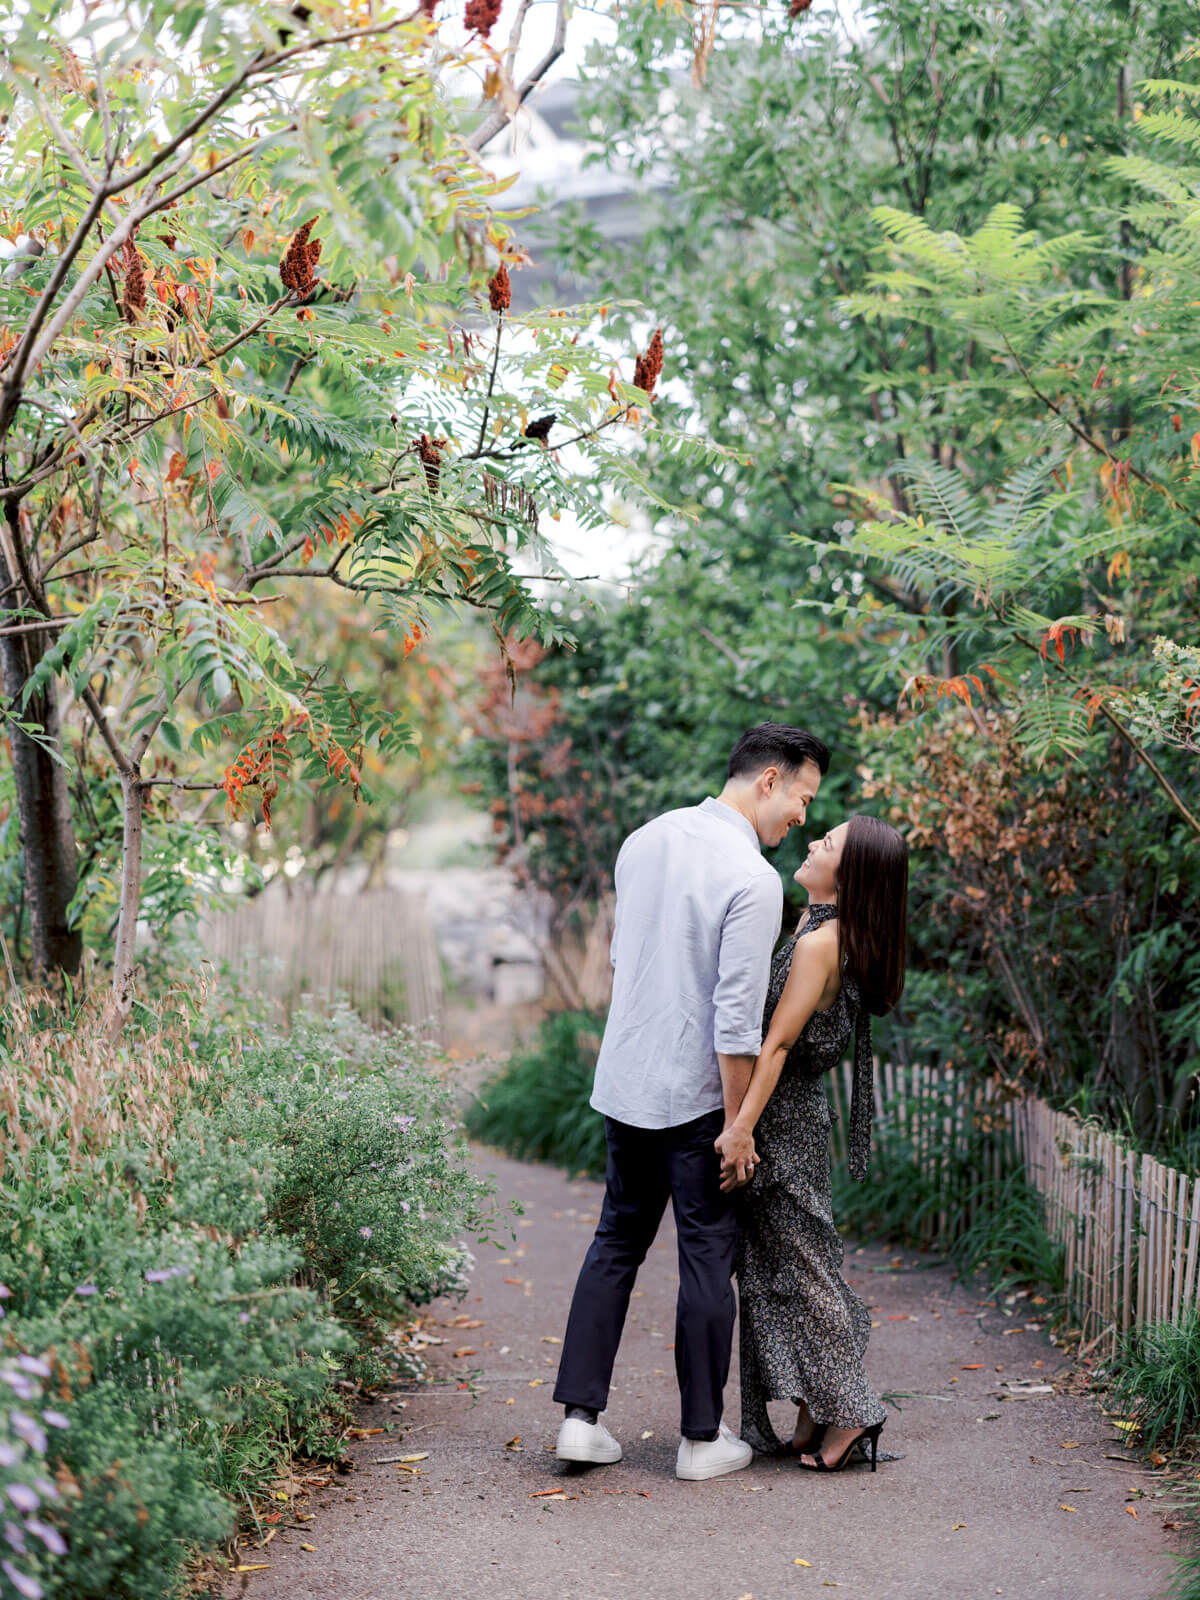 The engaged couple is romantically staring at each other amidst the lush greens at Brooklyn Park, NYC. Image by Jenny Fu Studio